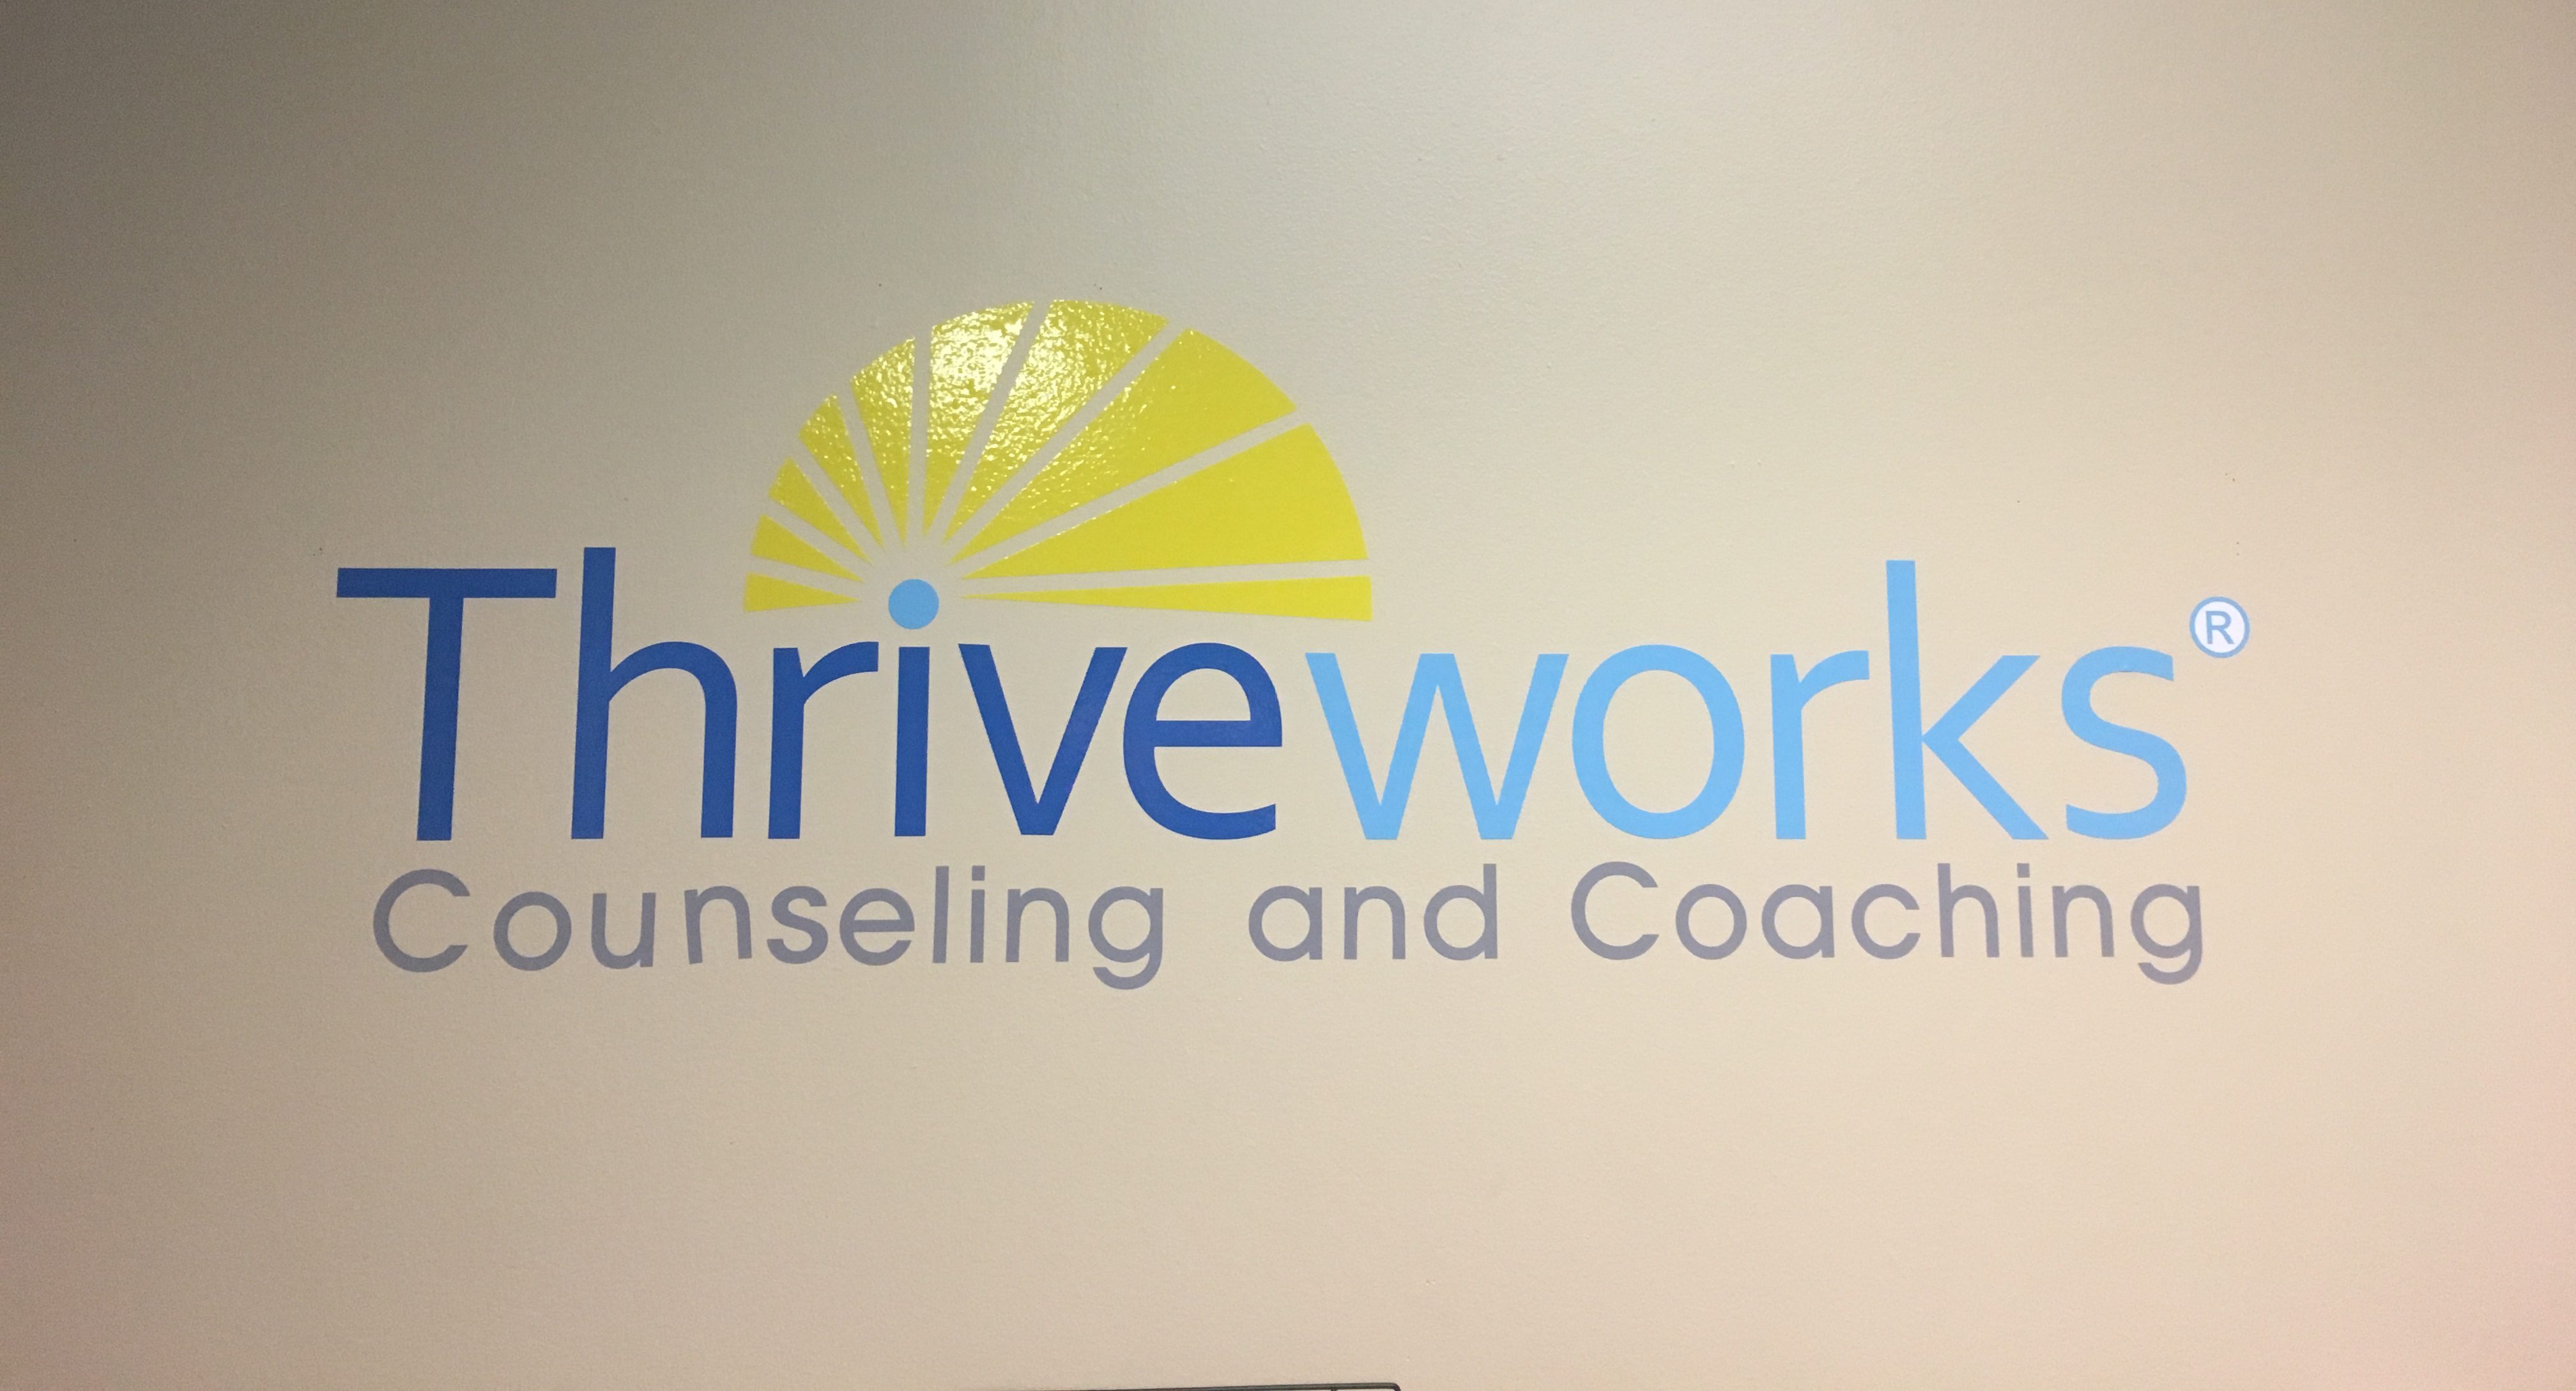 Grand Opening of Thriveworks